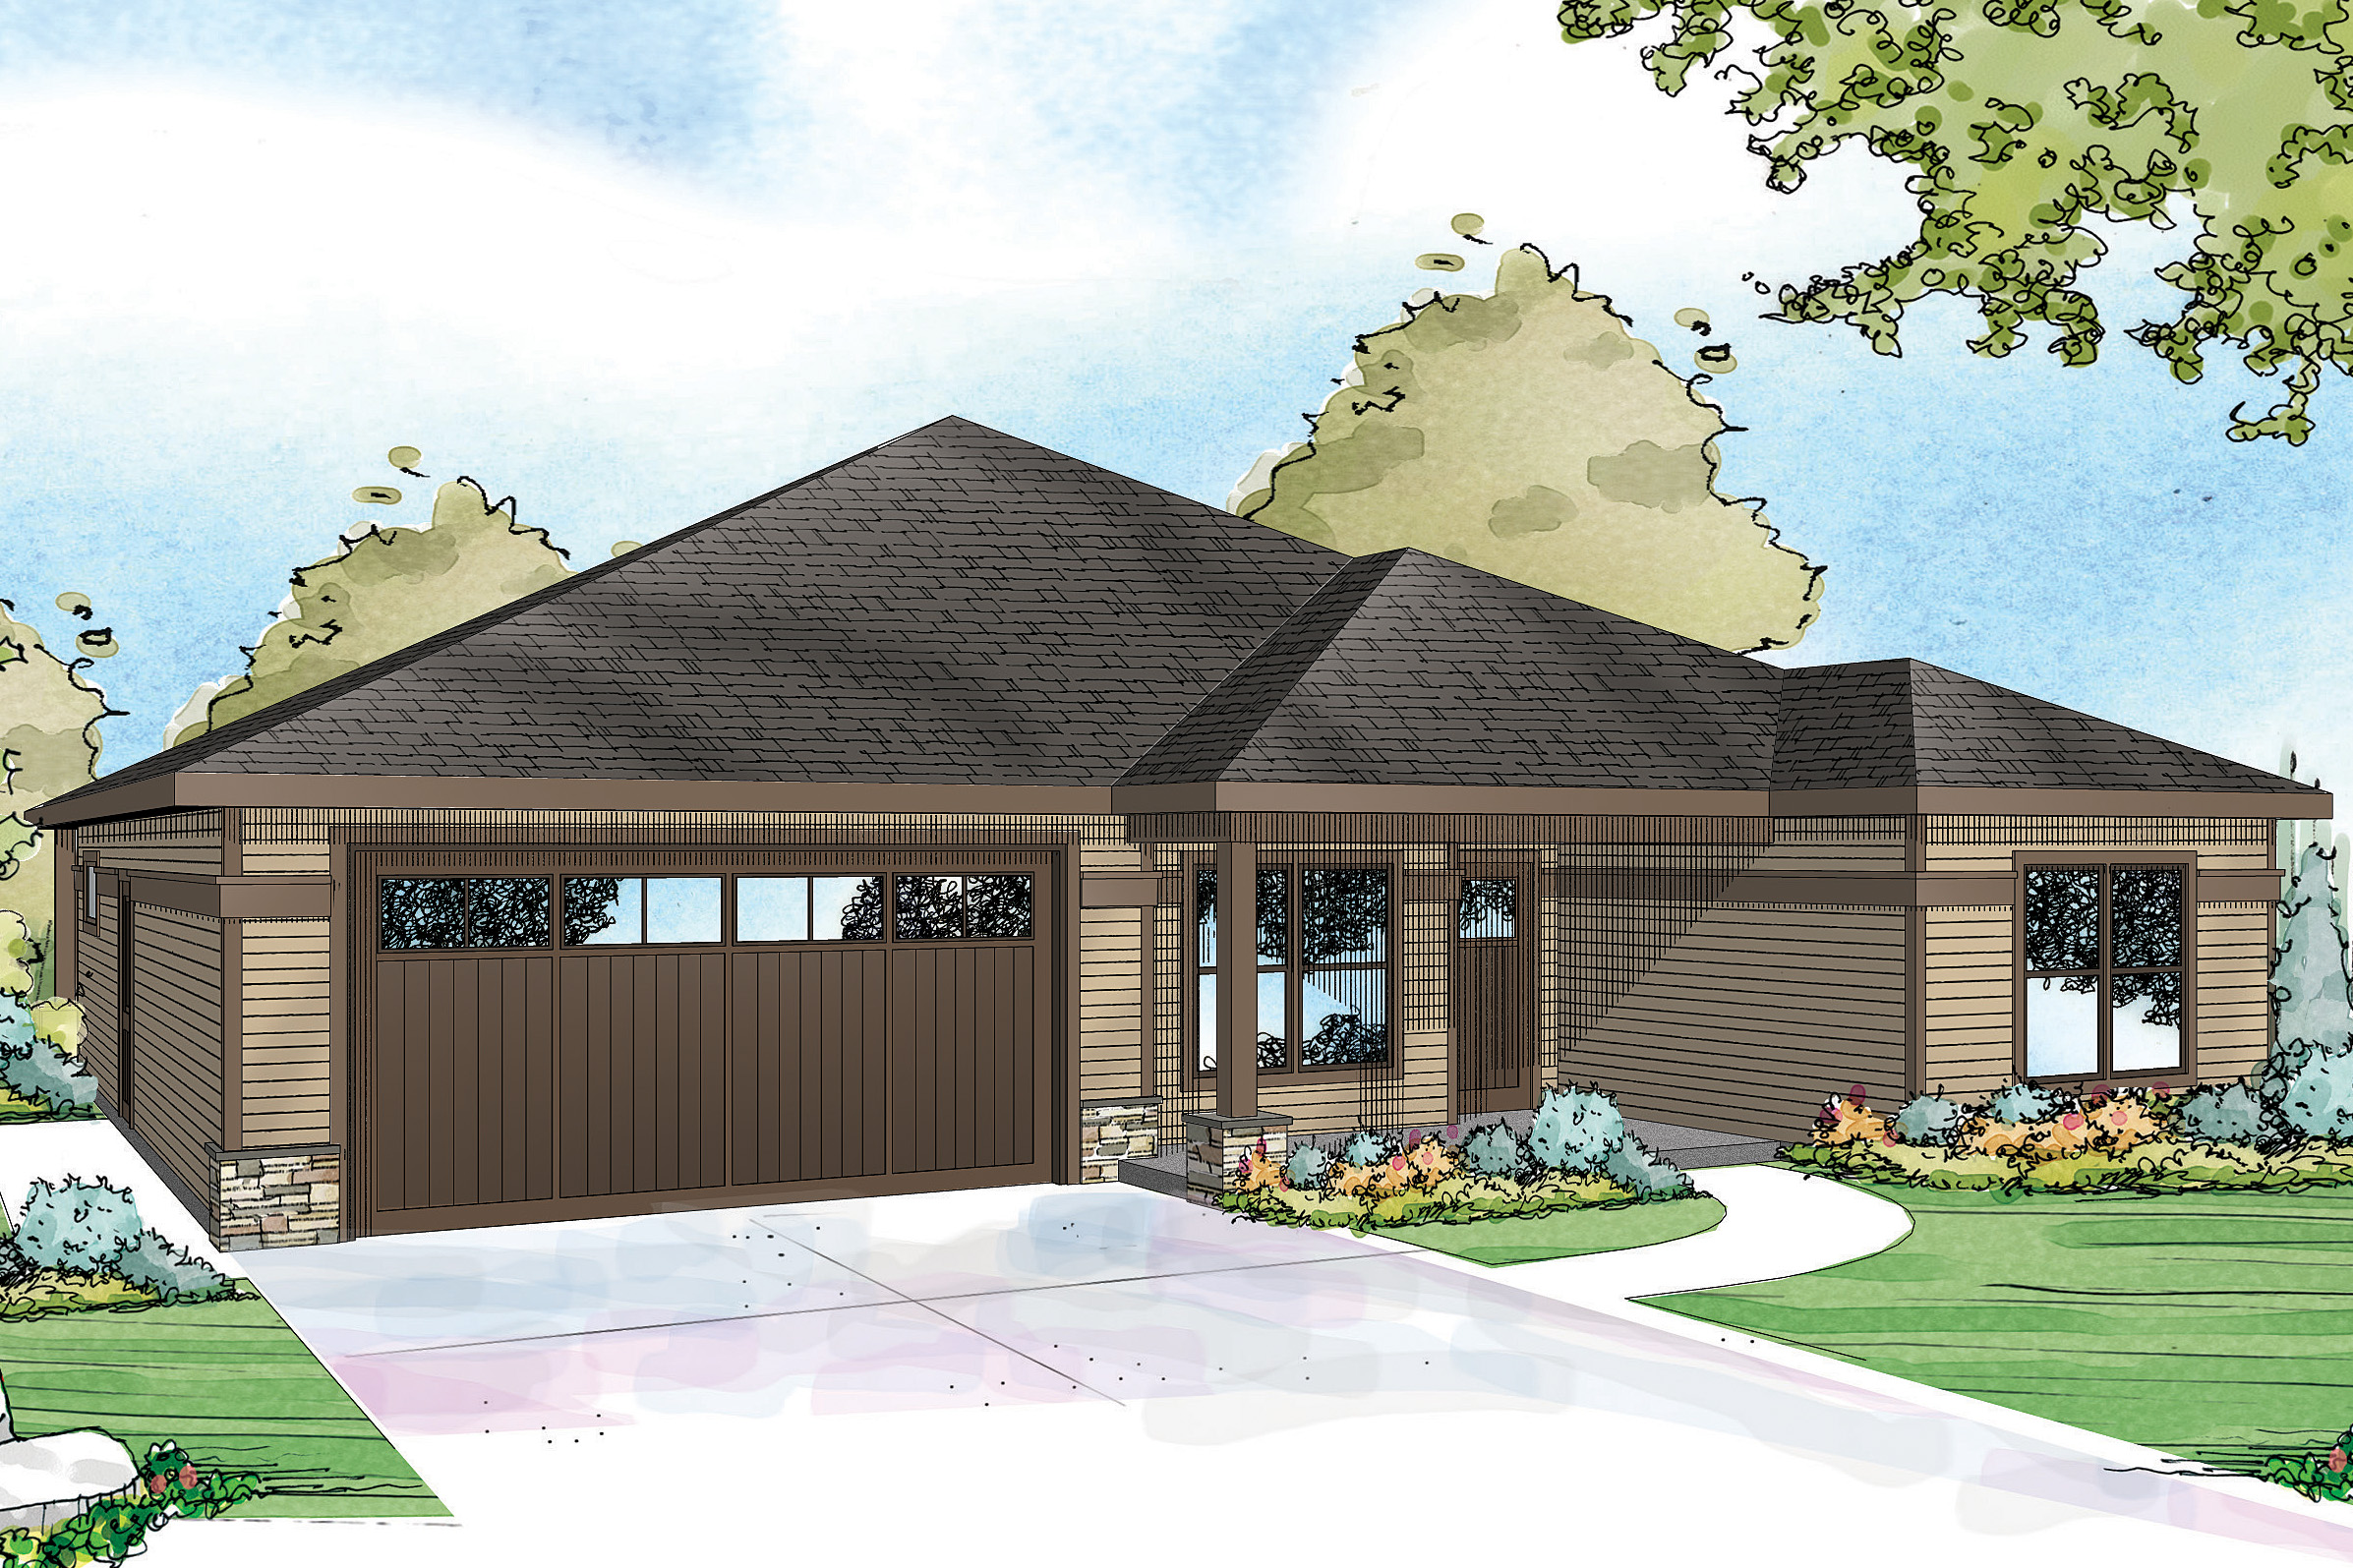 Country House Plan, Home Plan, Westfall 30-944, Ranch House Plan